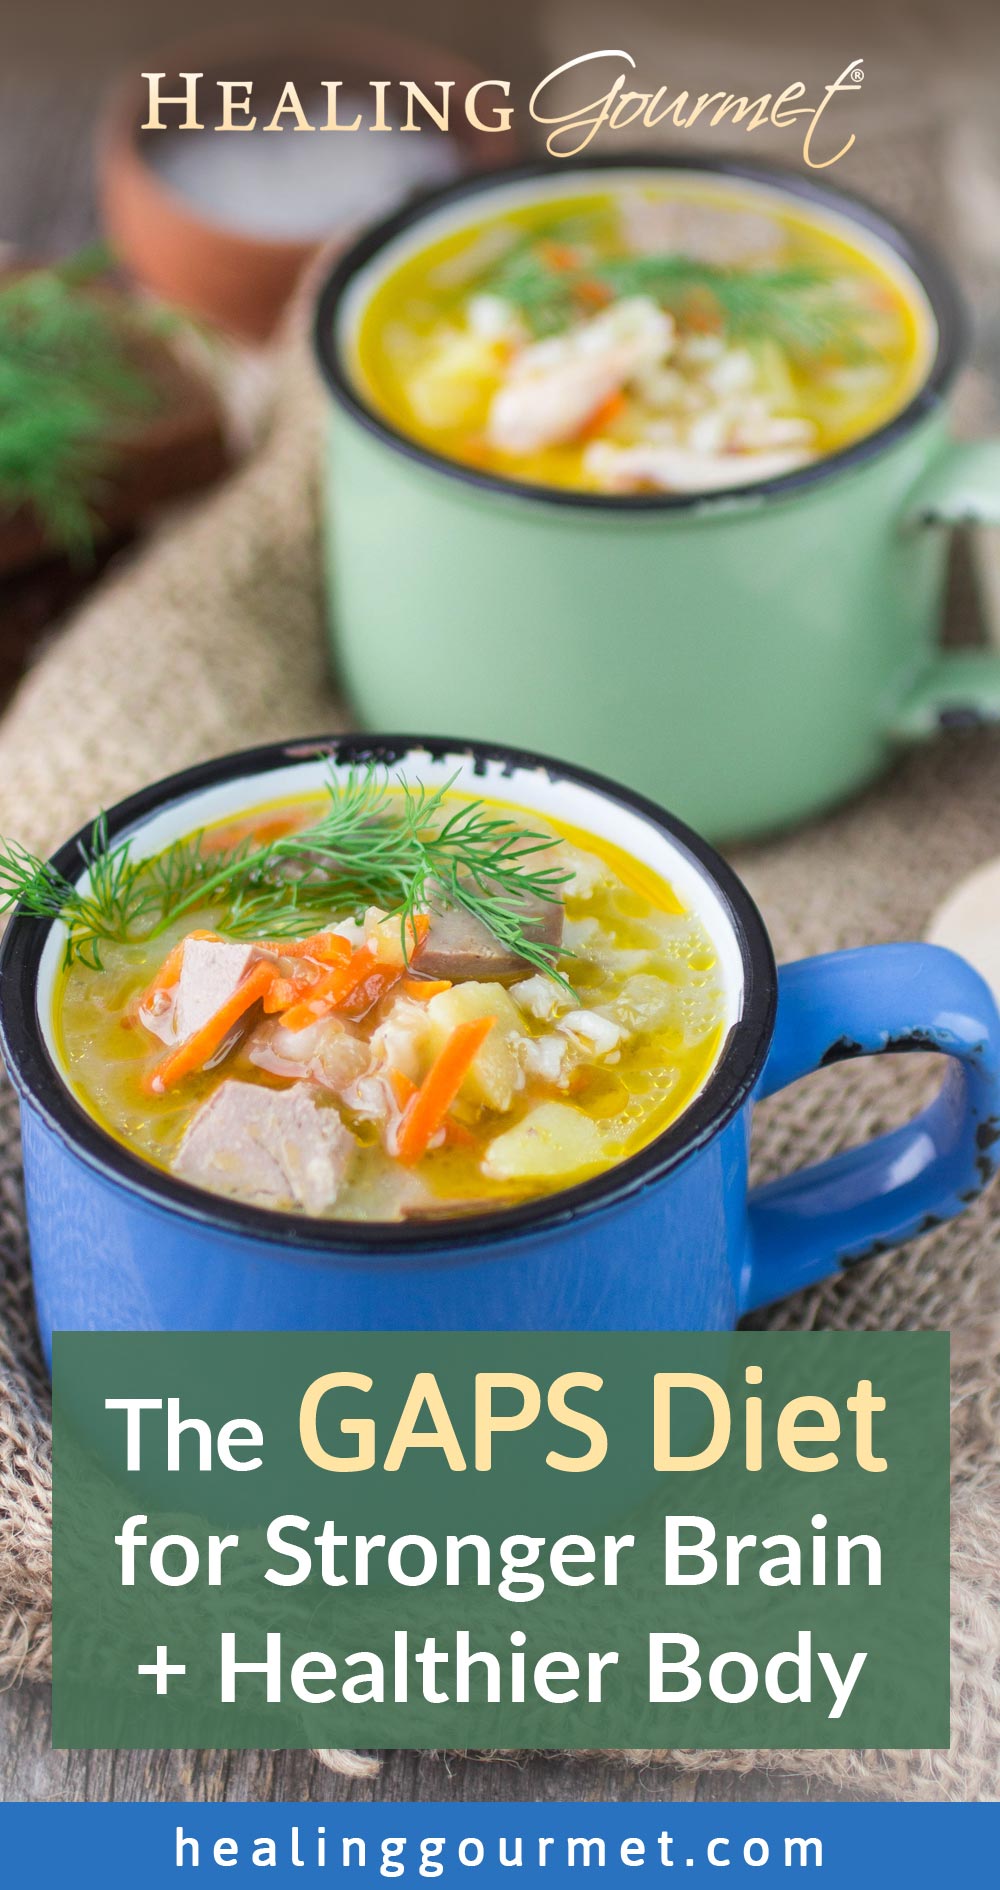 GAPS: A Healing Diet for Body and Mind